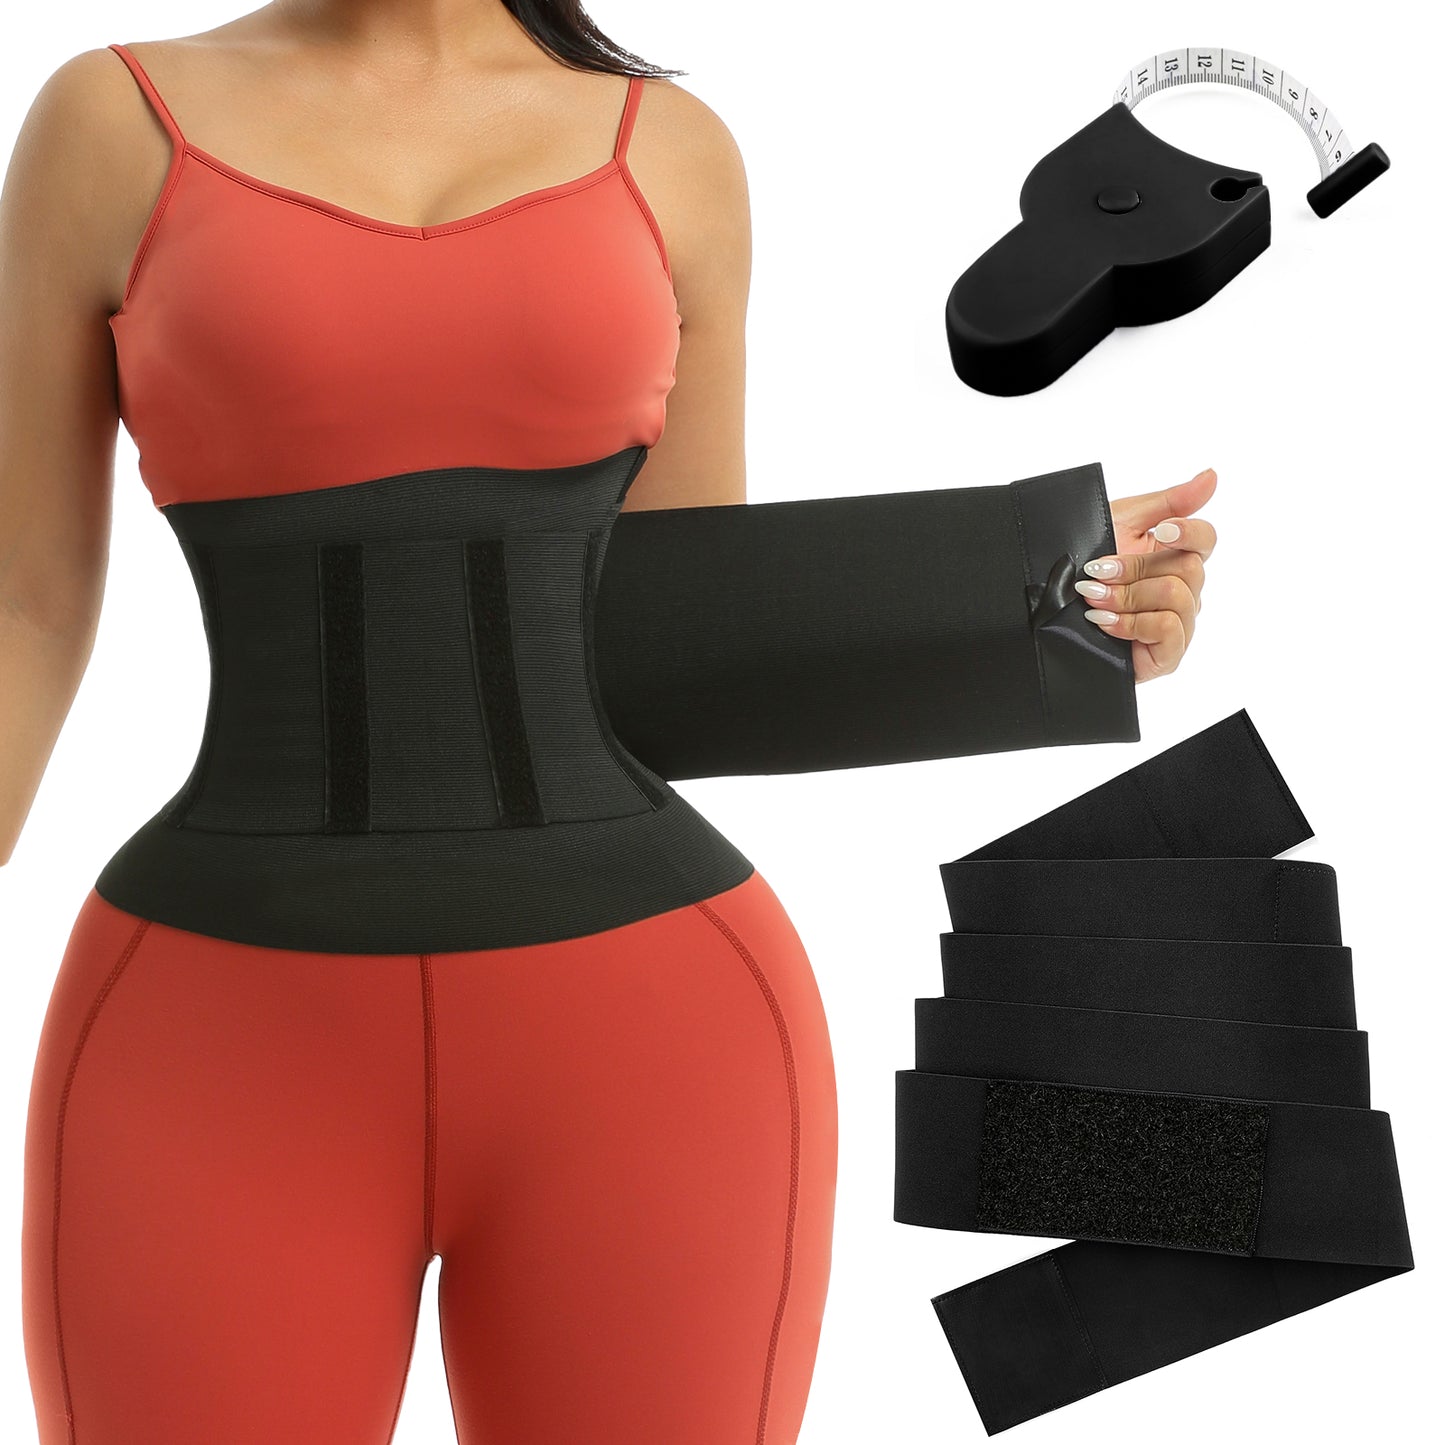 Women Invisible Sweat Waist Trimmer with Telescopic Tape Measure